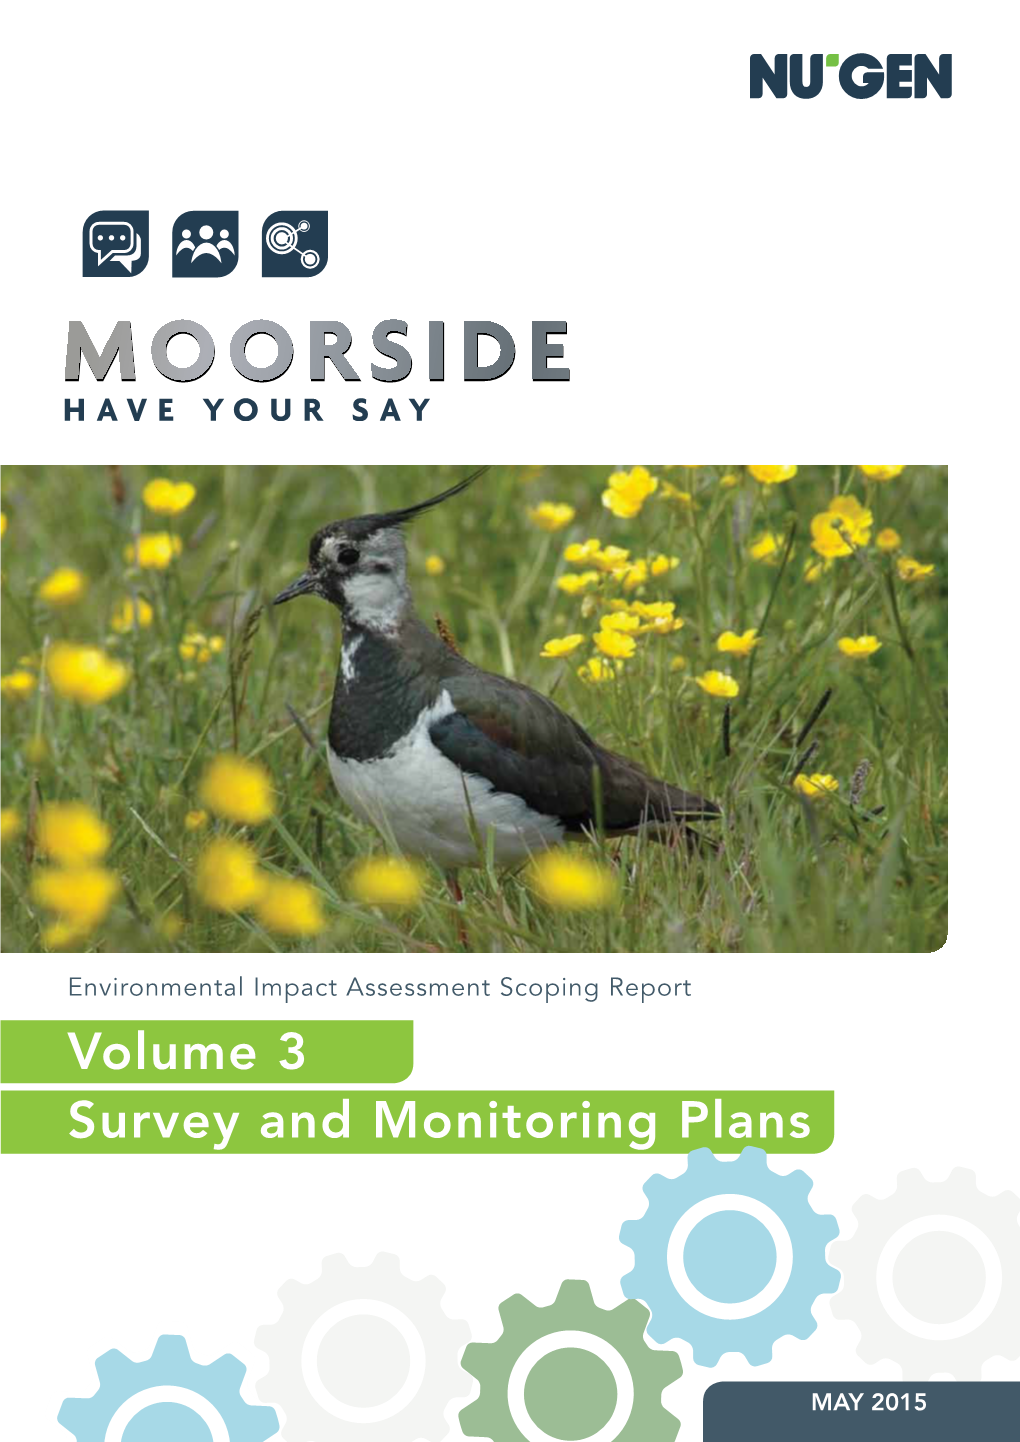 Volume 3 Survey and Monitoring Plans